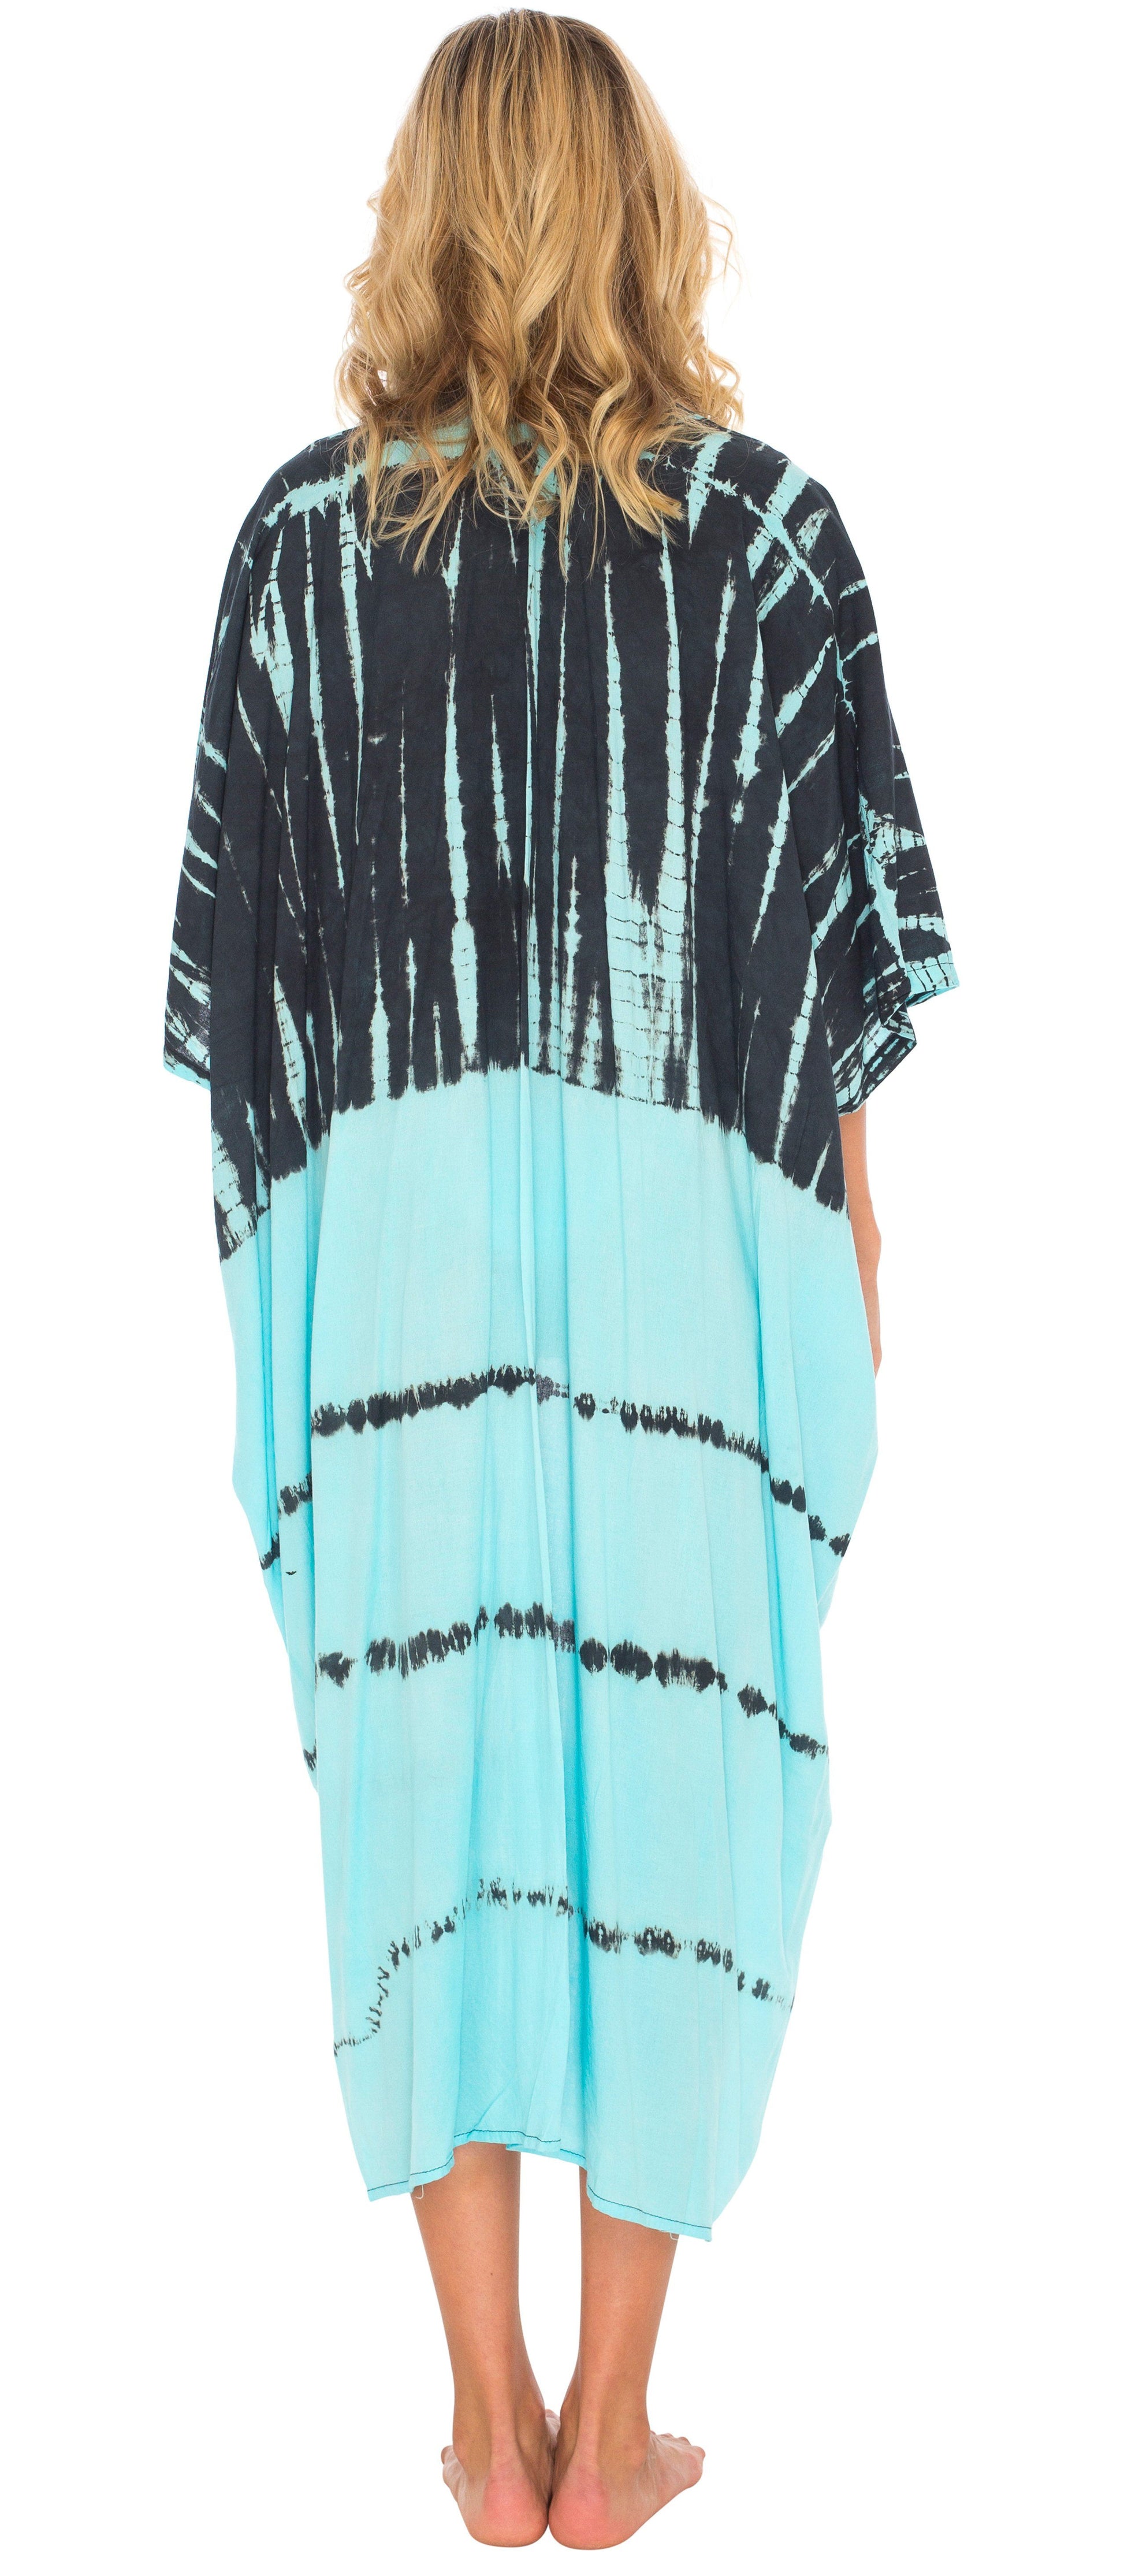 Tie Dye Open Front Long Summer Kimono Cardigan with Three-Quarter Sleeves - LoveShuShi-turquoise and black cardigan